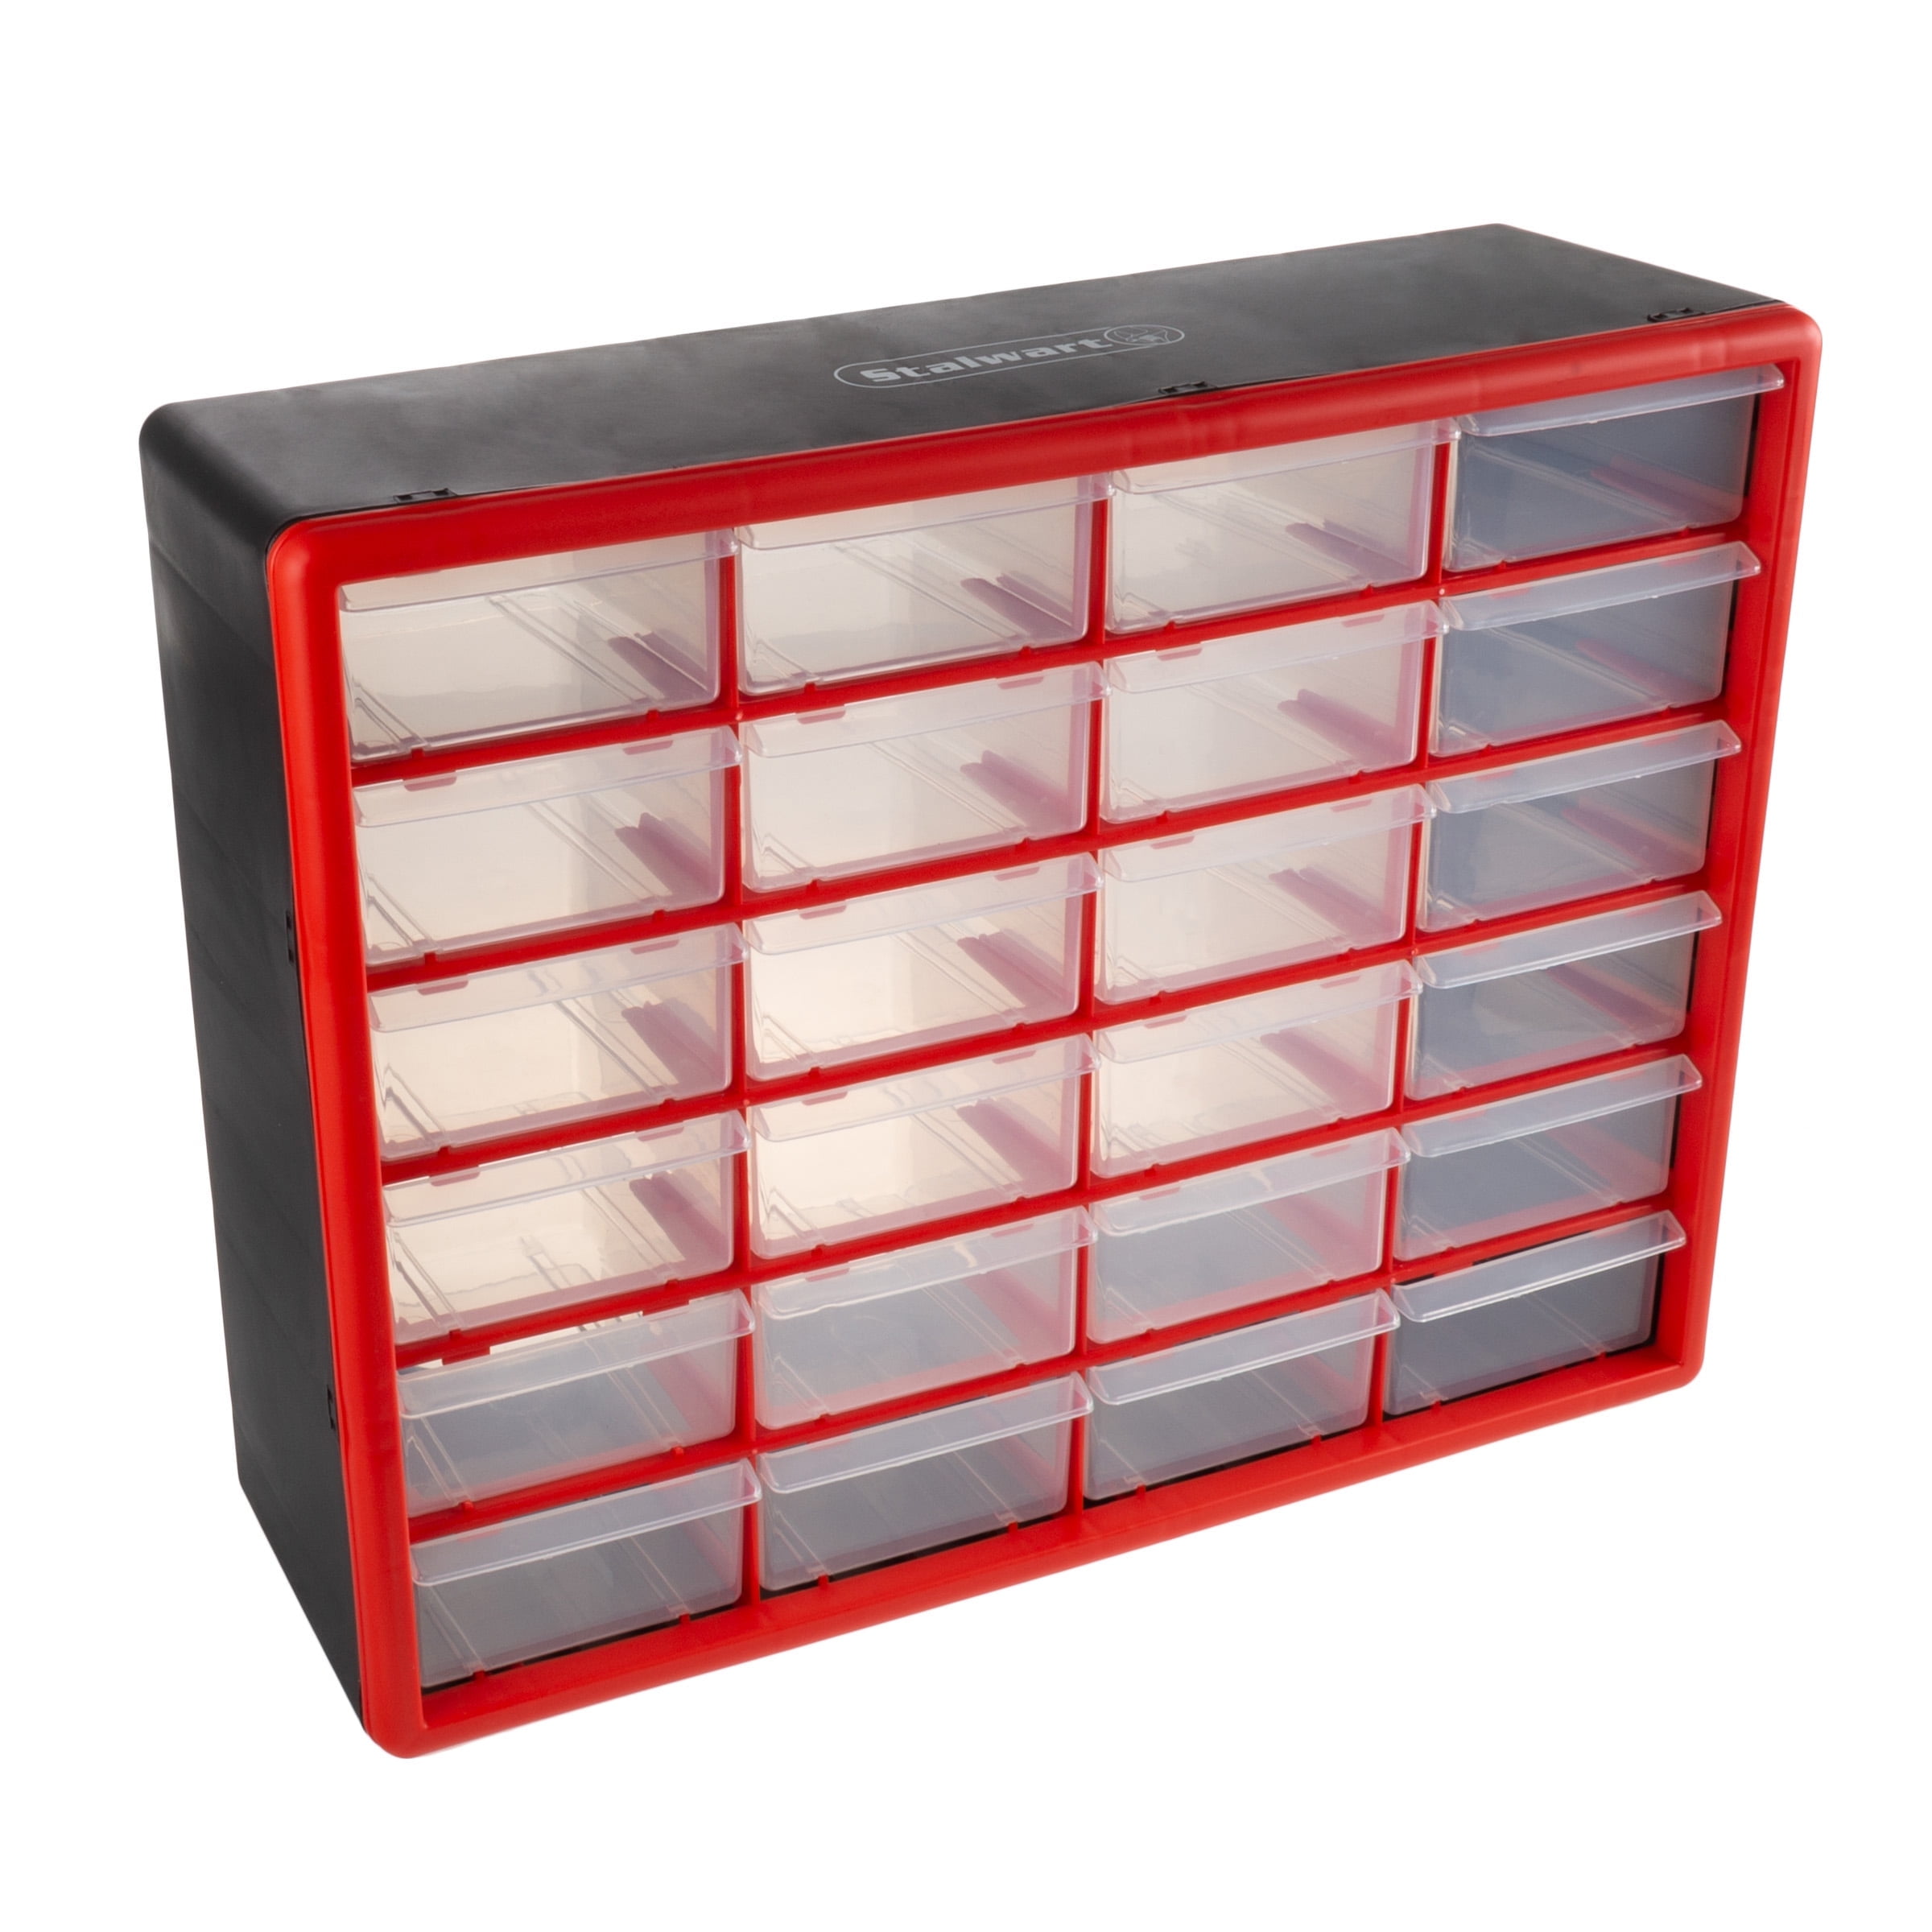 Stalwart 15 Bin Storage Rack Organizer- Durable Carbon Steel with Stackable  Plastic Drawers for Tools, Hardware, Crafts, Office Supplies, More